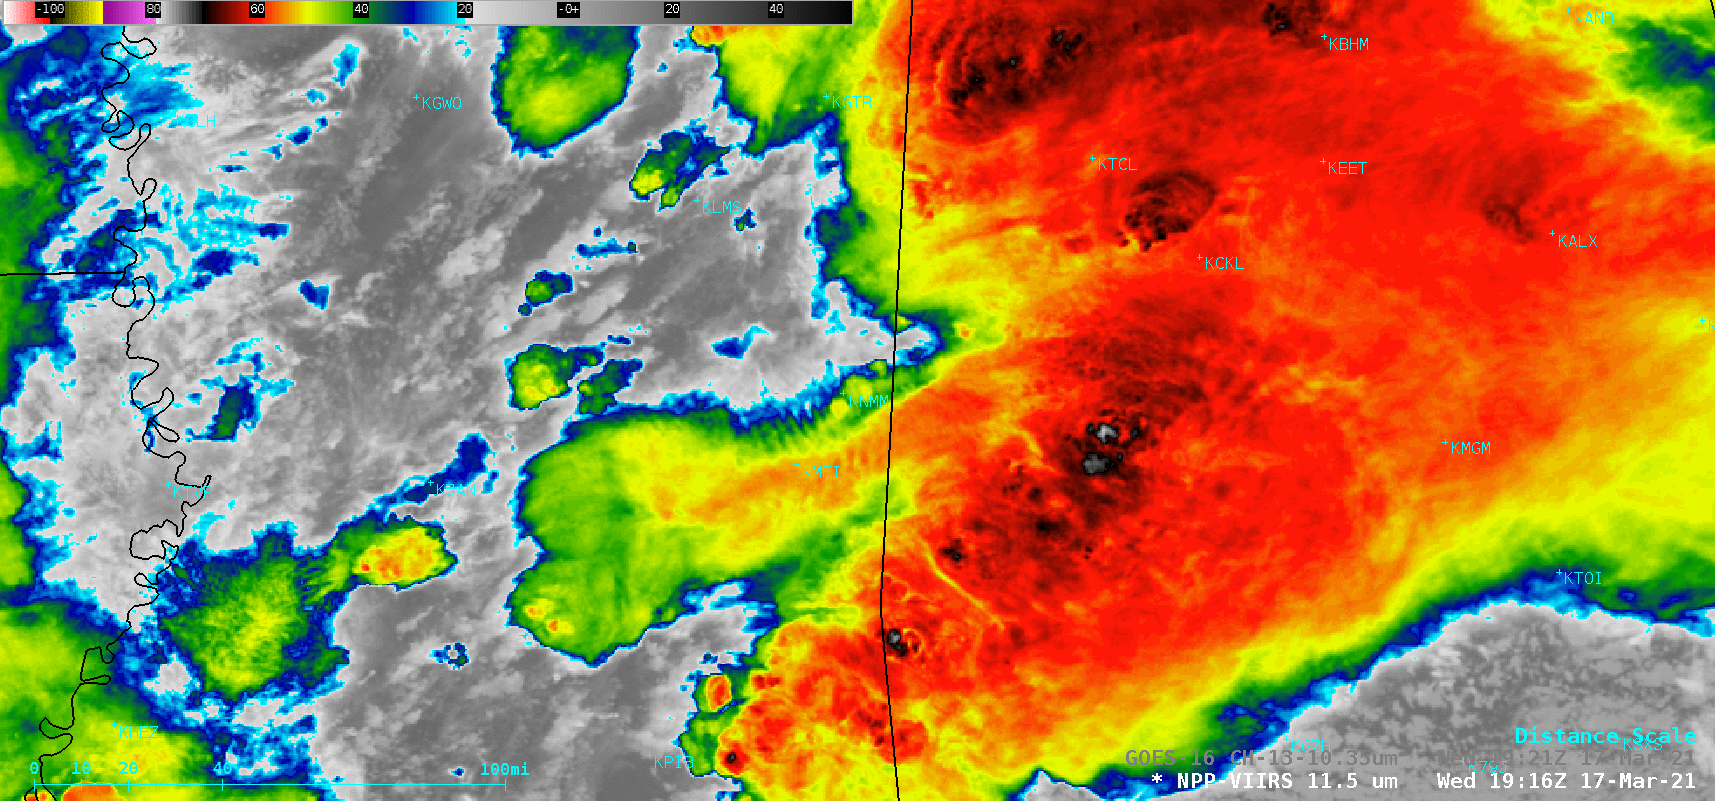 GOES-16 “Clean” Infrared Window (10.35 µm) and Suomi NPP VIIRS Infrared Window (11.45 µm) images at 1921 UTC [click to enlarge]